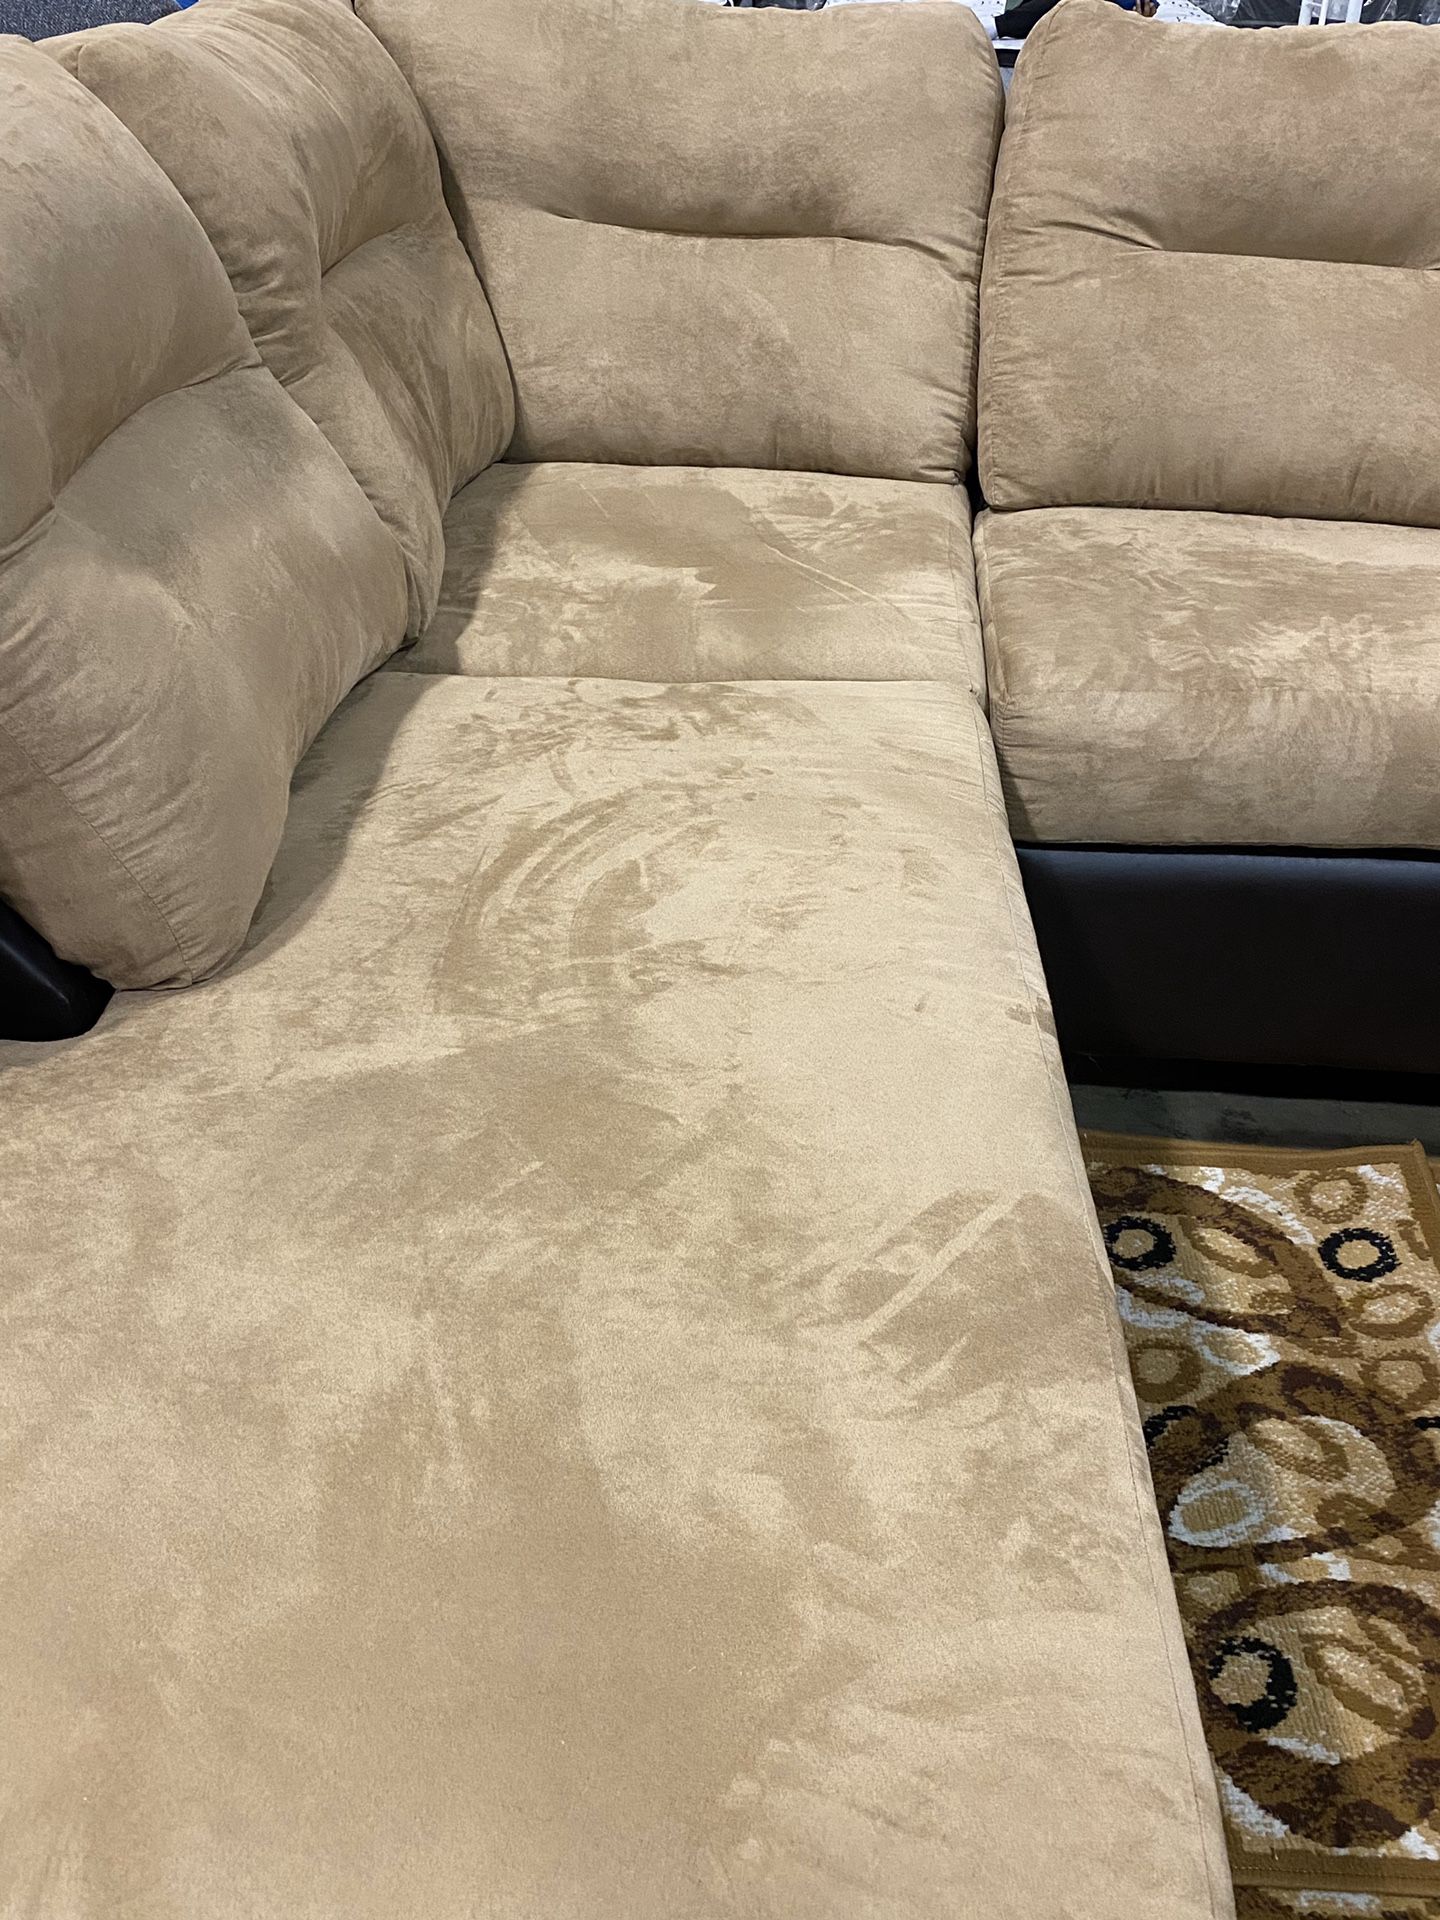 Couch, Sectional color is coffee and light brown